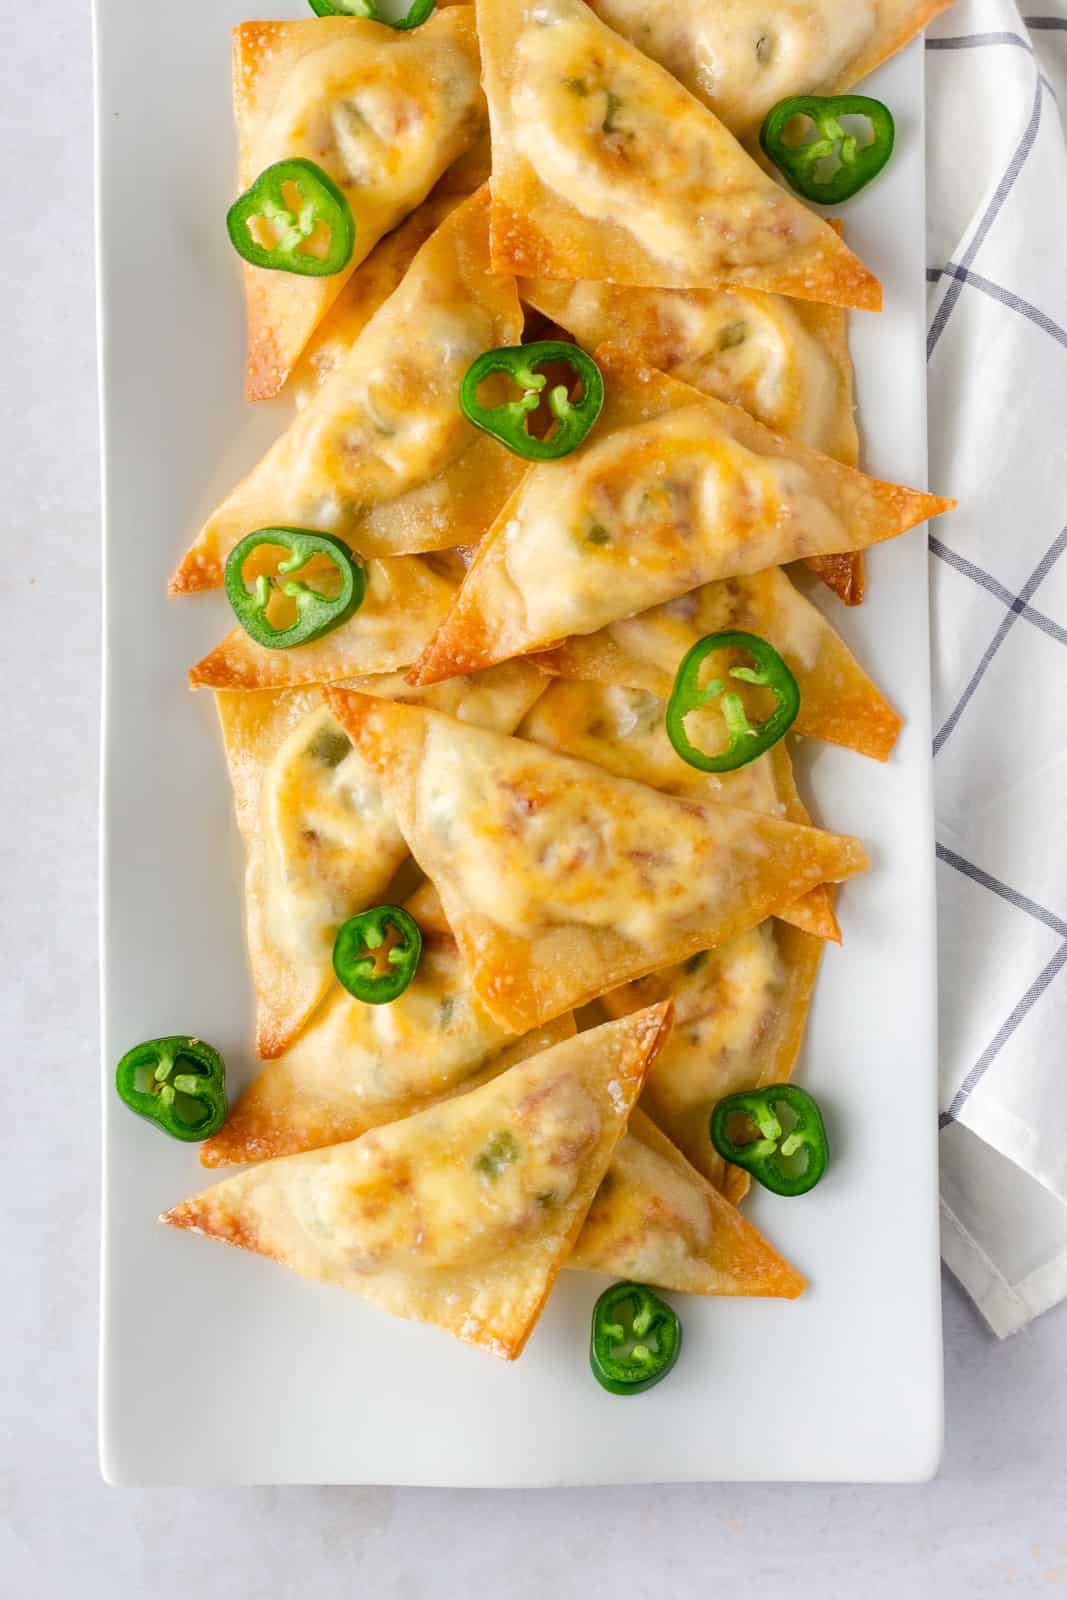 Overhead view of wontons on a white plate and garnished with jalapeno slices.